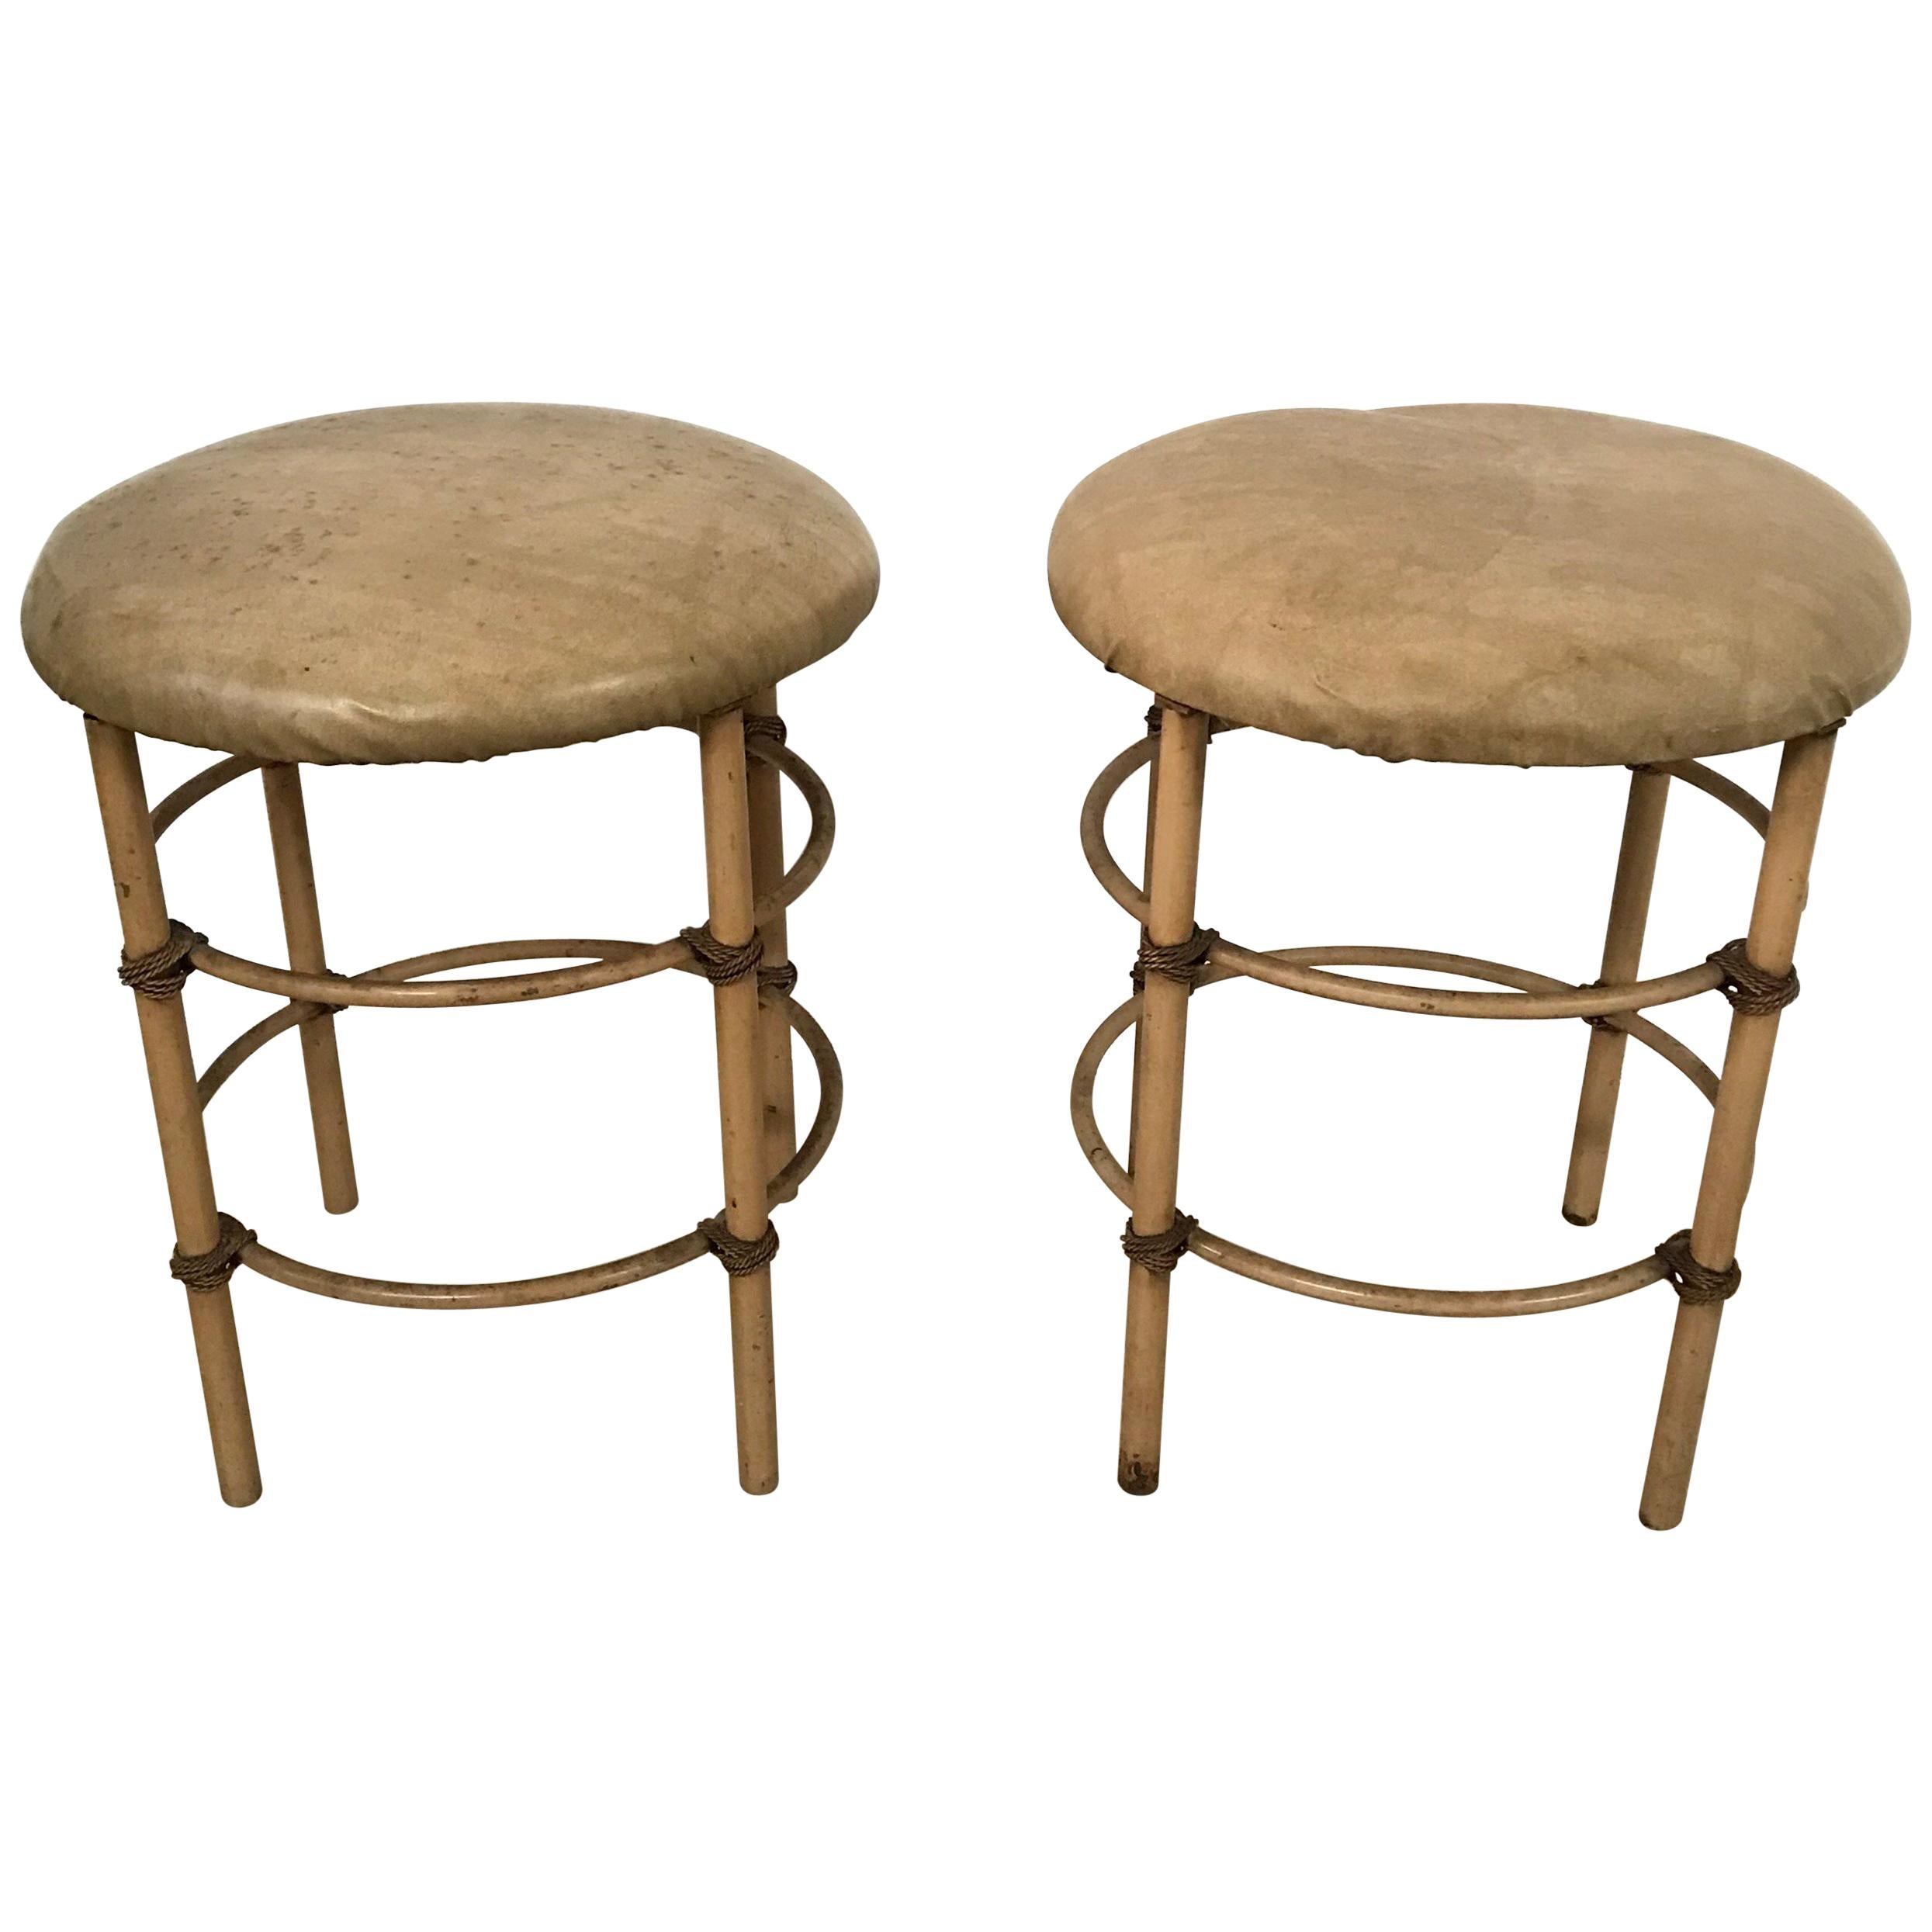 Pair of Mid Century Hollywood Regency Stools or Ottomans, USA, Circa 1960s